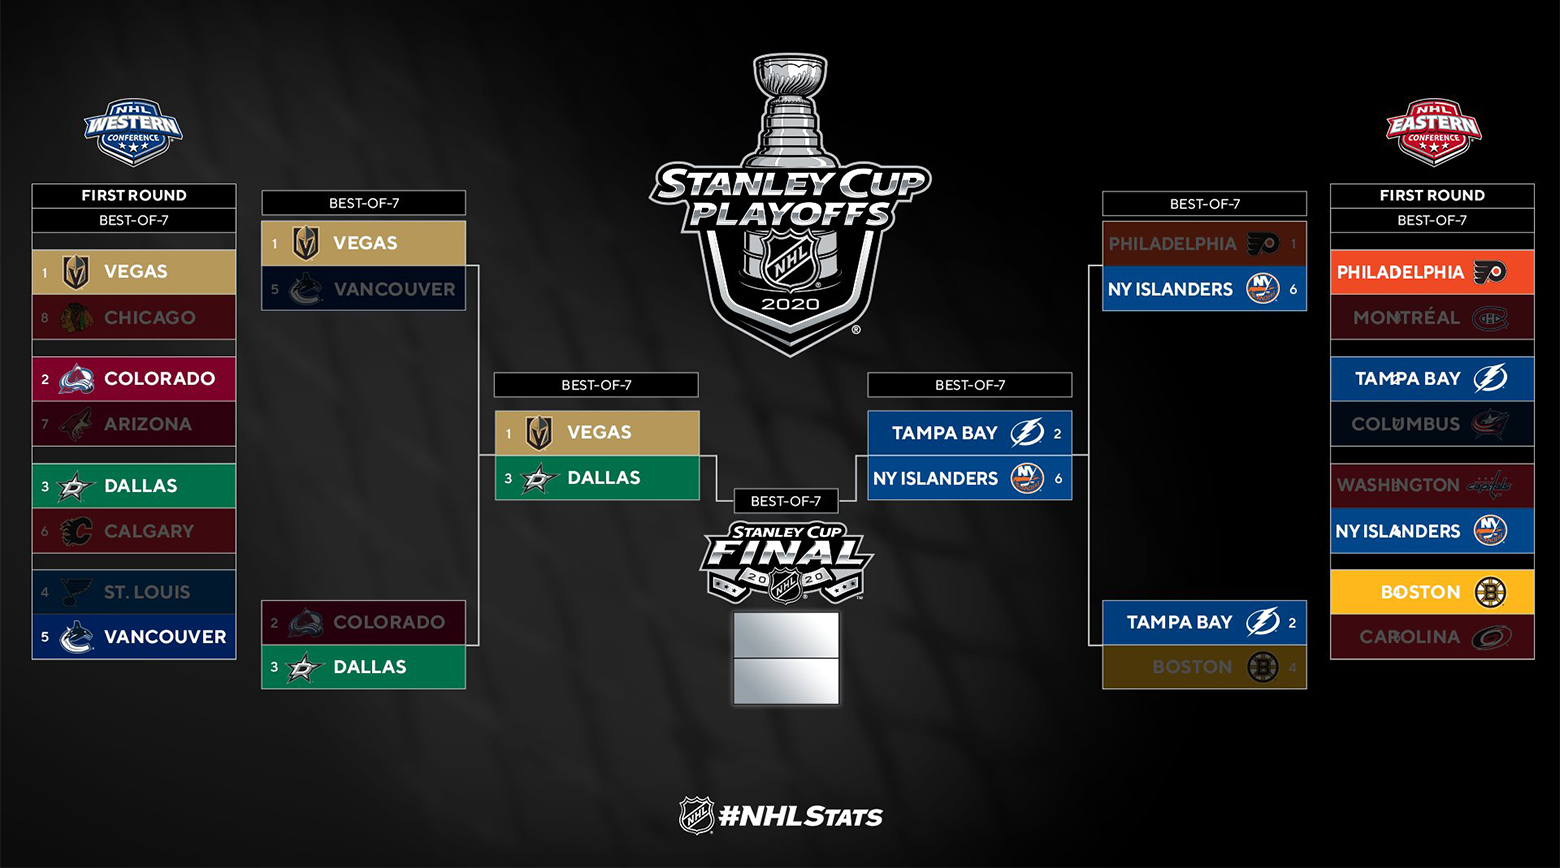 Nhl Playoffs 2021 / A Full Guide To The 2021 Nhl Playoffs The New York